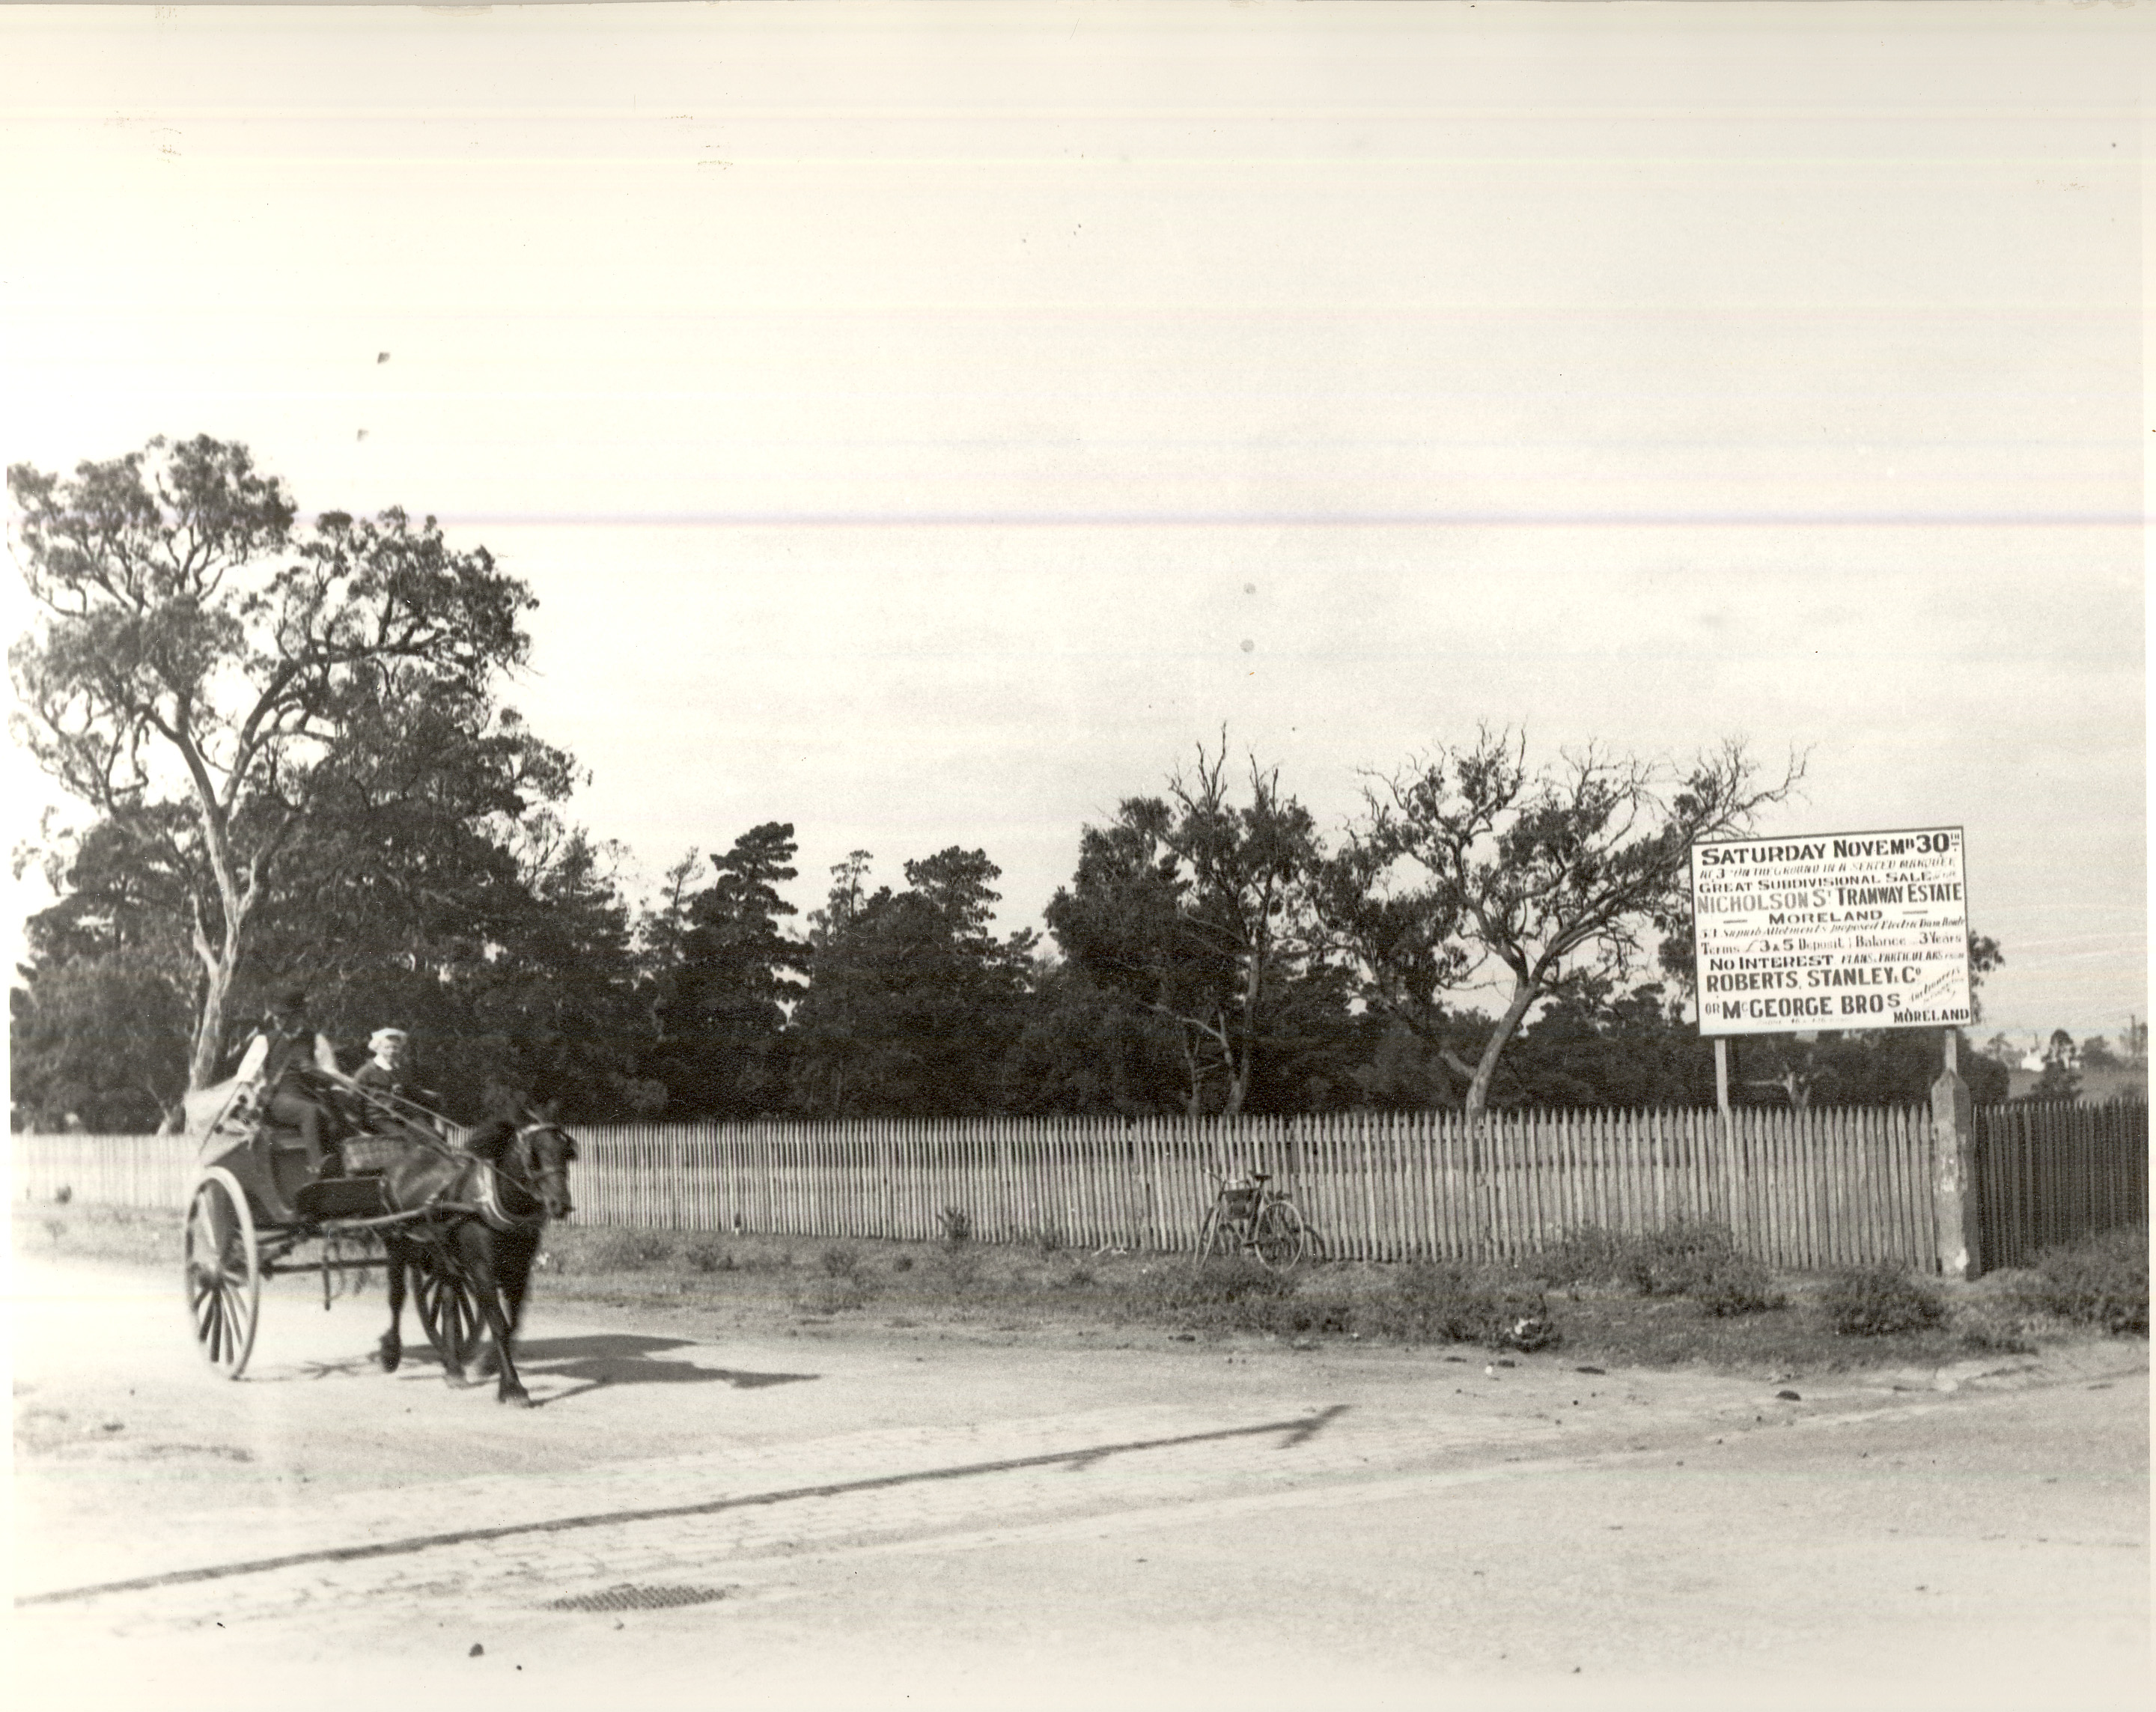 Image of Horse and buggy alongside sign for Tramway Estate sale